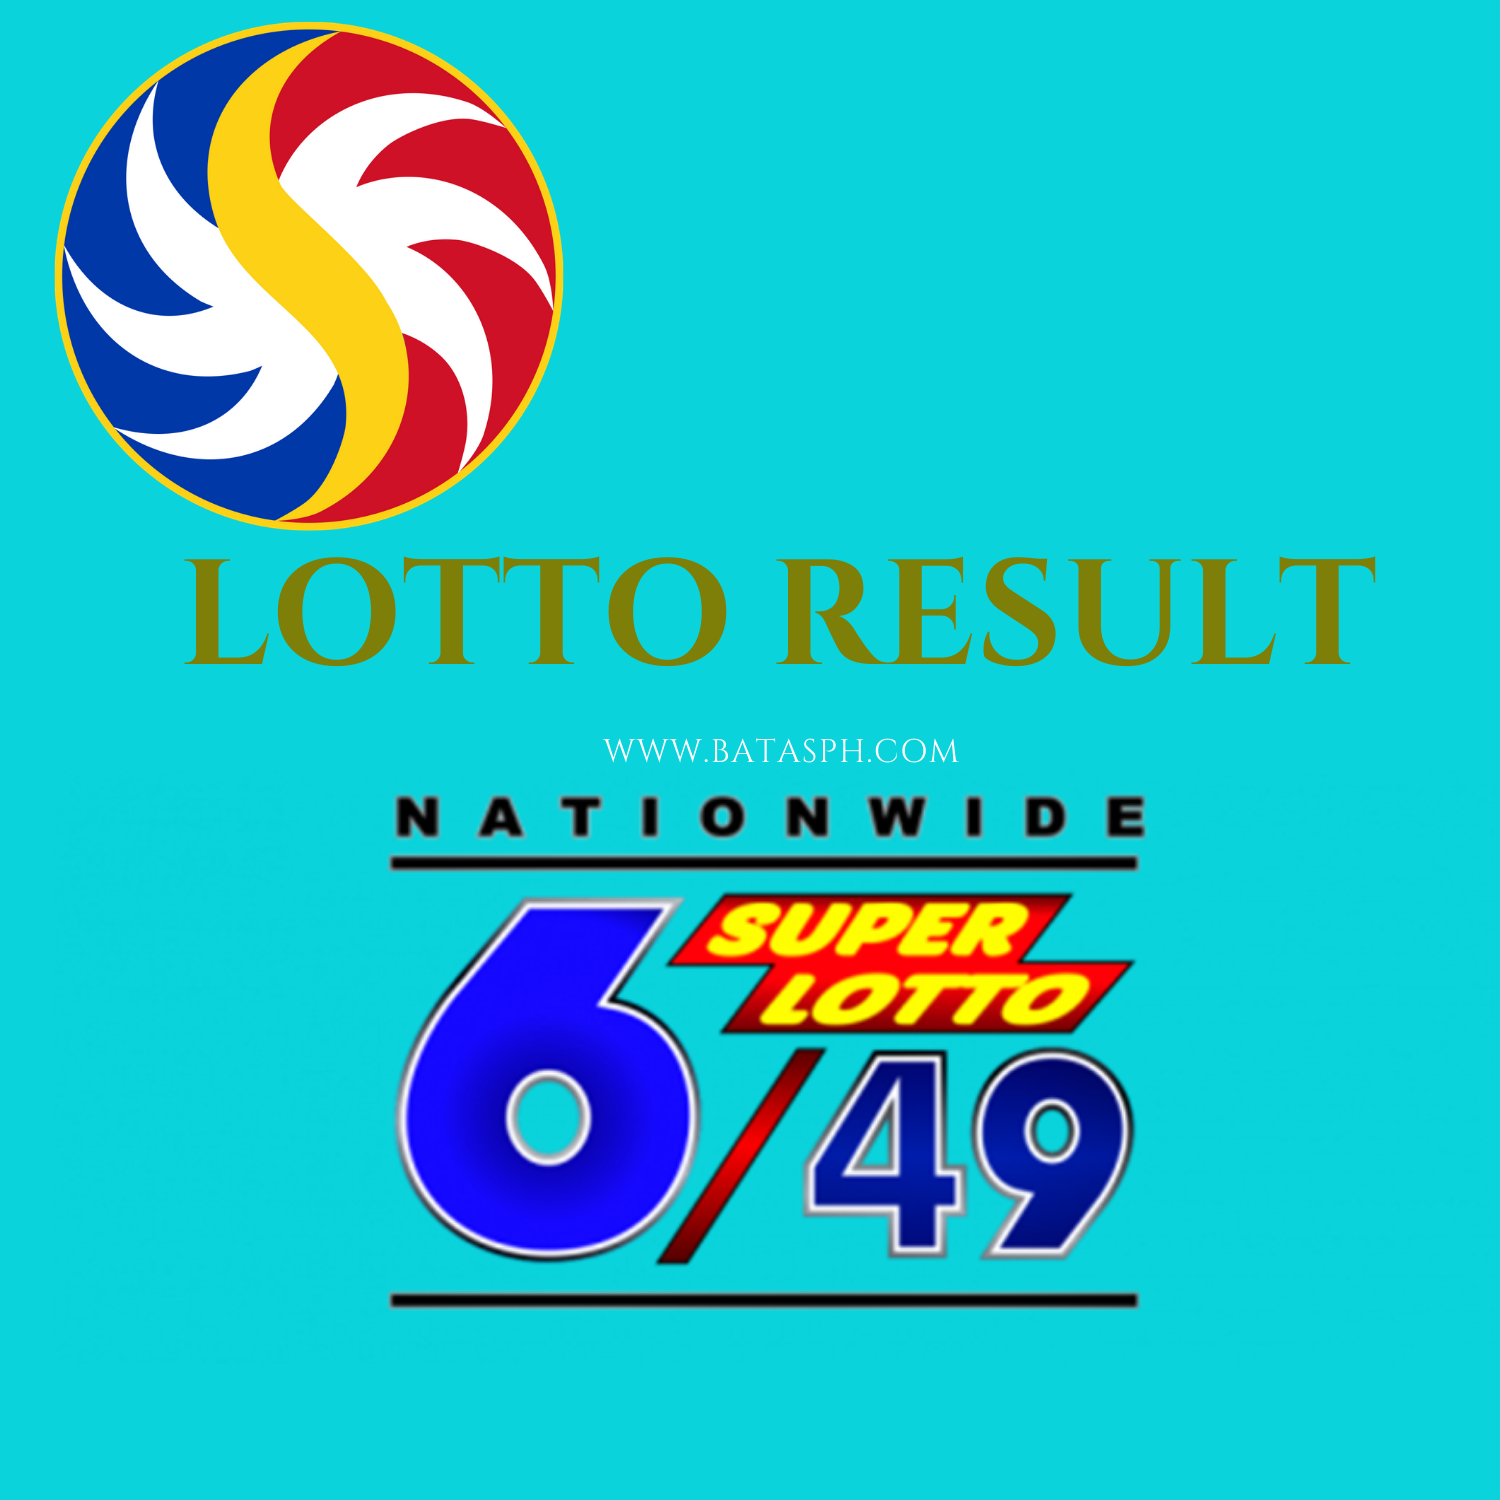 PCSO LOTTO RESULT TODAY - Super Lotto - 6/49 (August 30, 2020)